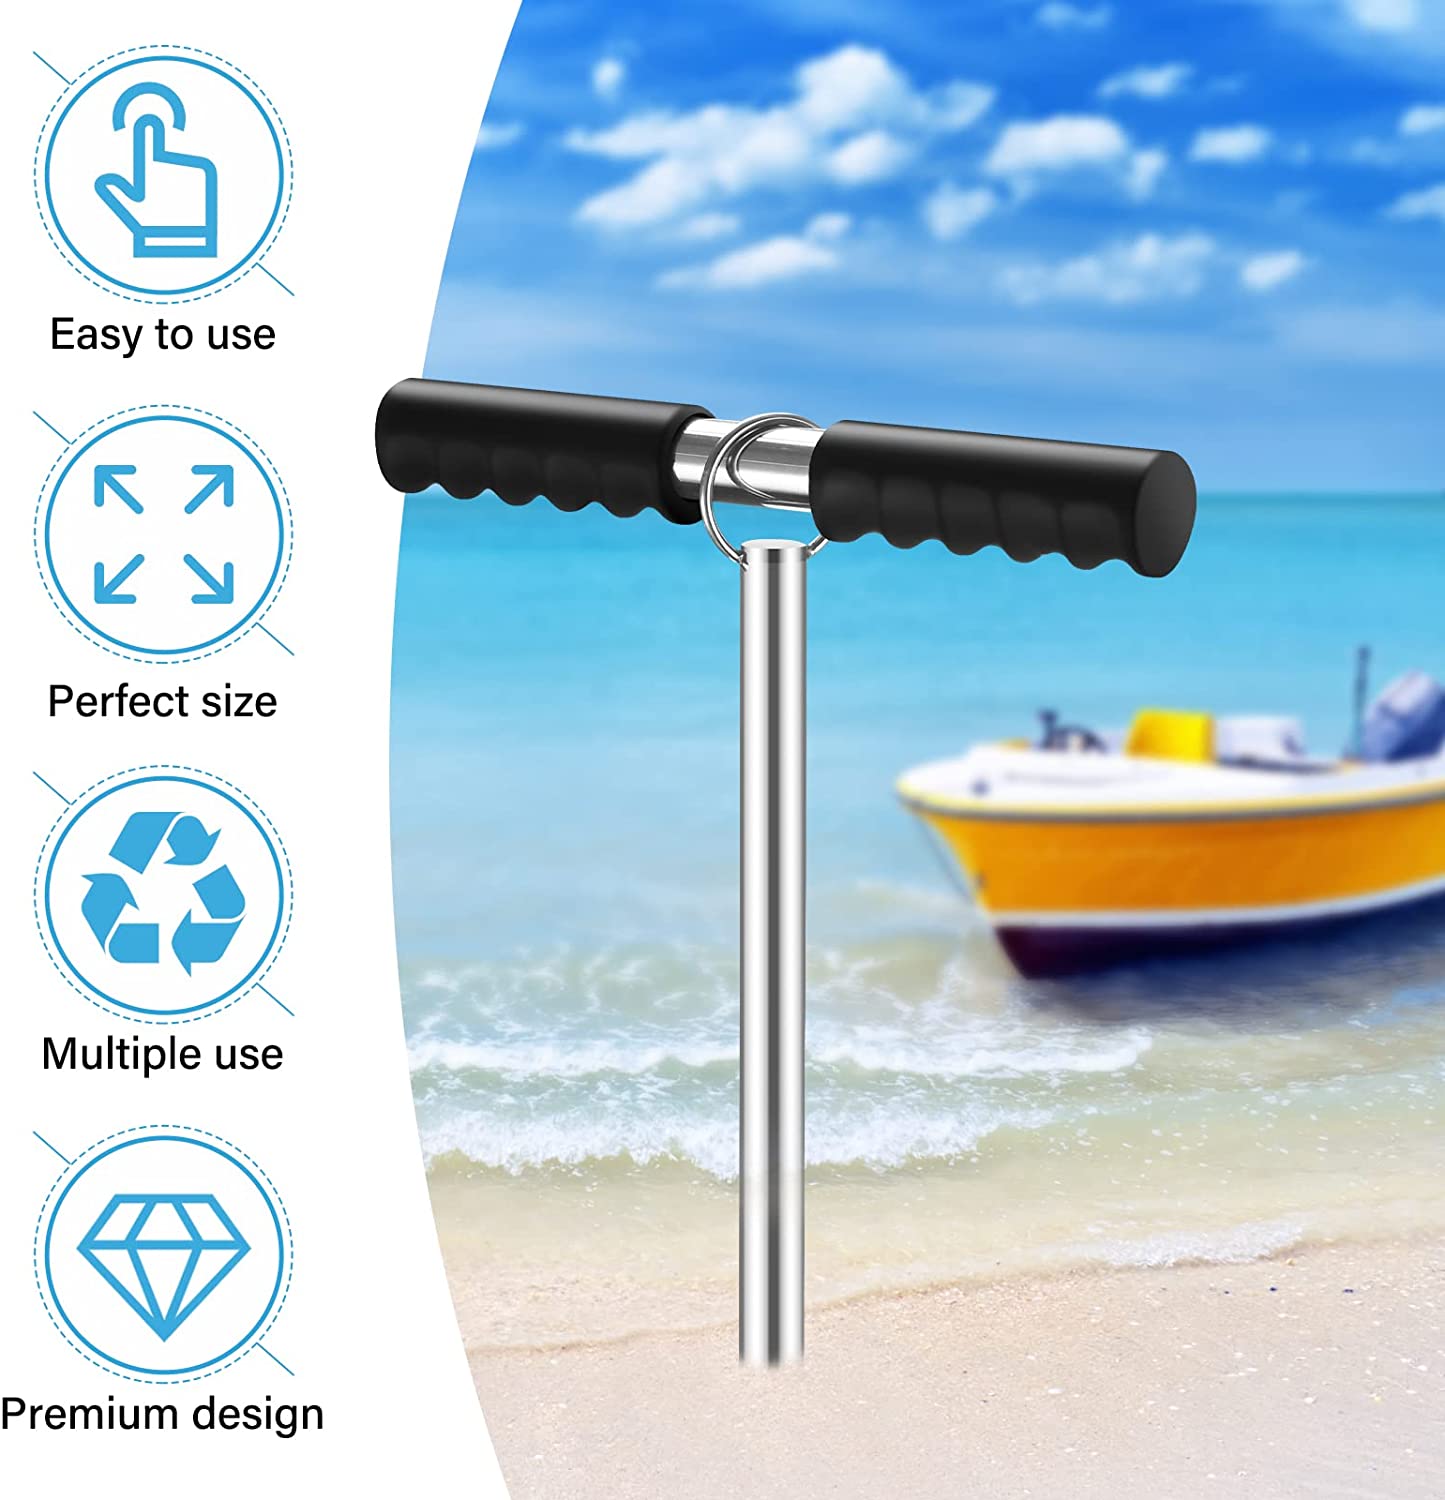 DACK Boat Anchor, 23'' Sand Anchor, Pontoon, Kayak Anchor, Jet Ski for 25' Boats, Keeps Your Watercraft Securely Anchored Near Shore, Sand-bar or in Shallow Water